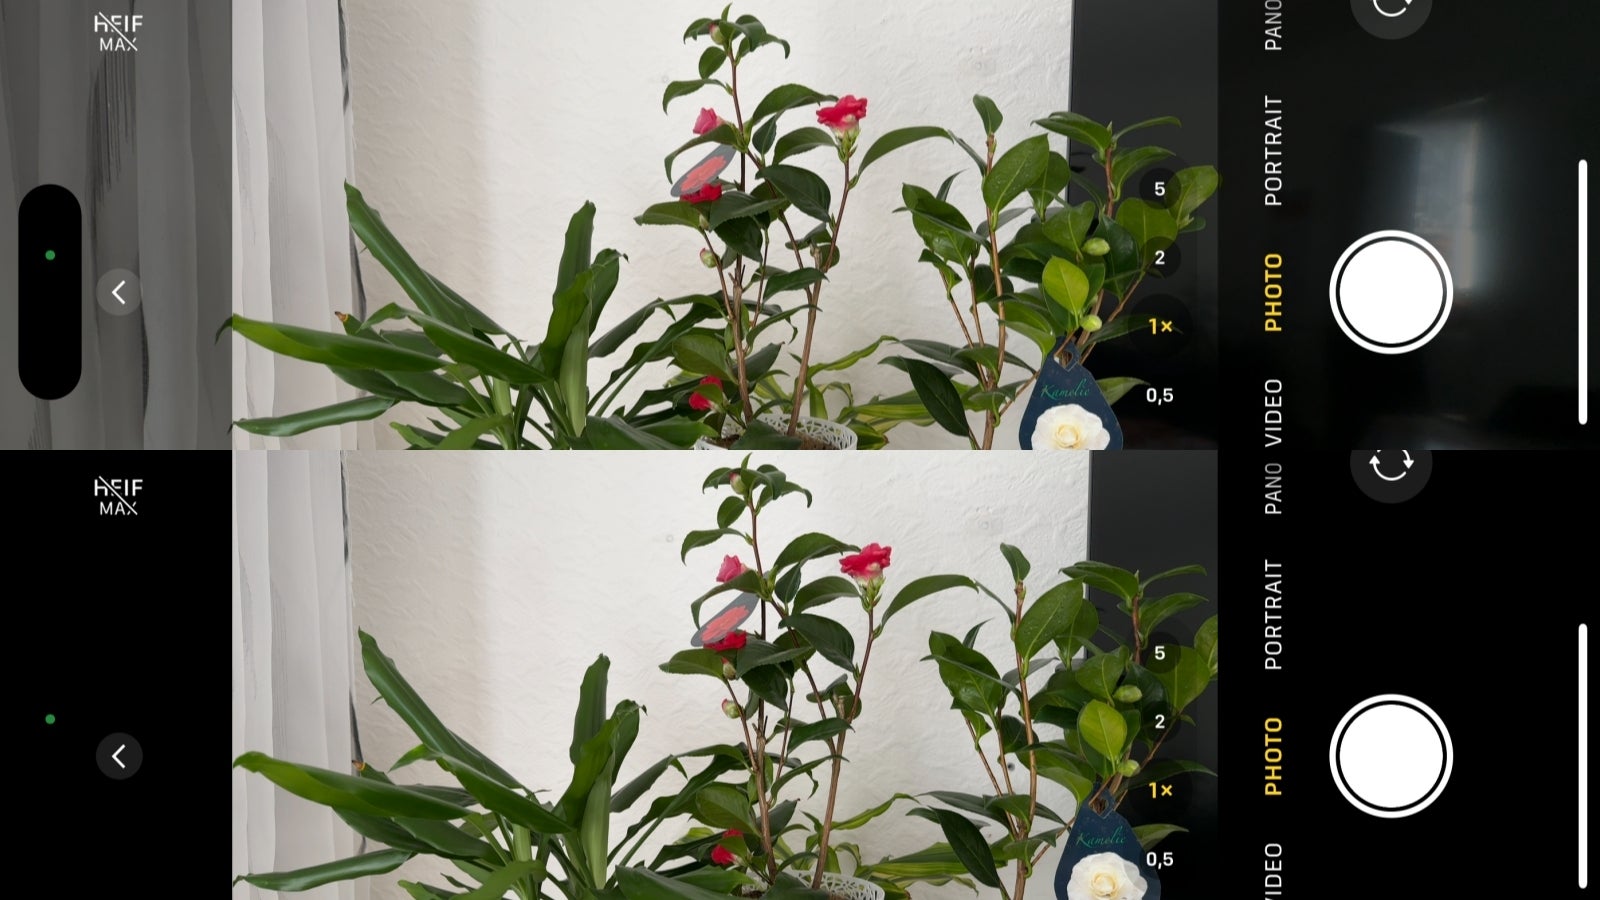 View Outside the Frame ON (top) vs View Outside the Frame OFF. - Taking photos with iPhone will never be the same: 5 game-changing camera tricks you need now!